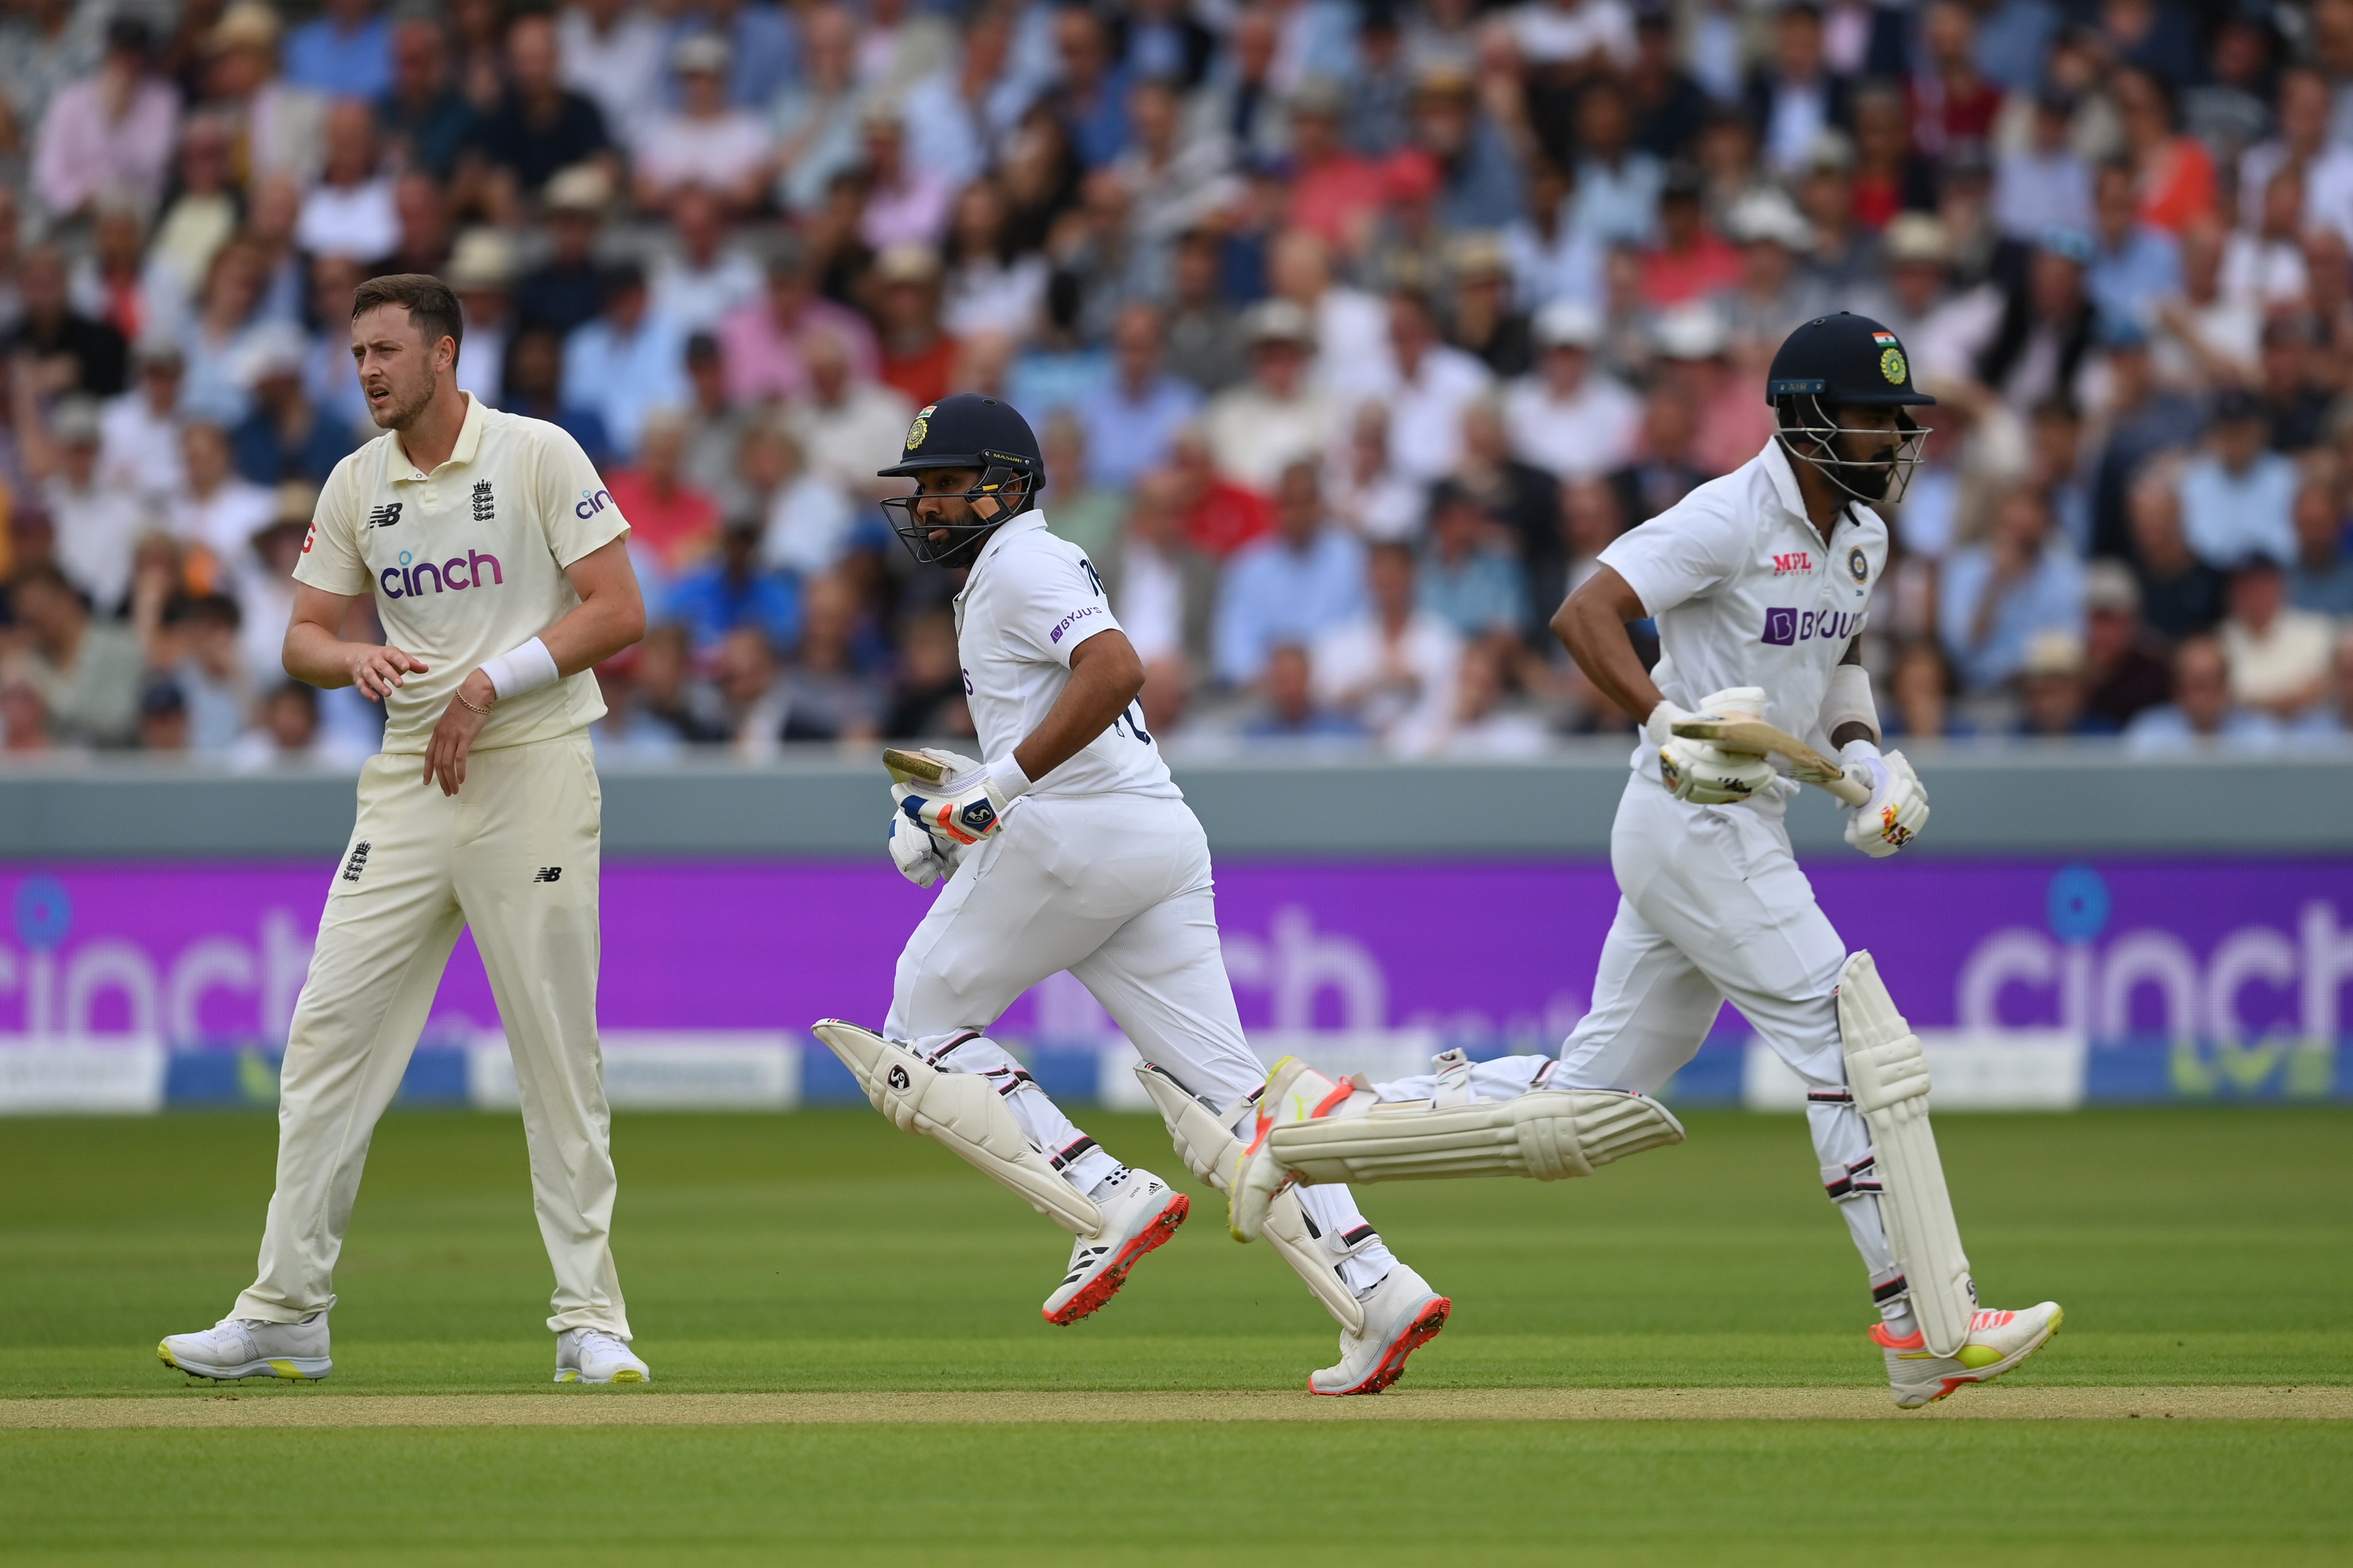 ENG vs IND | Lord's Day 1 Talking Points: Solid Indian opening, Rohit's brilliance and Pujara's struggles